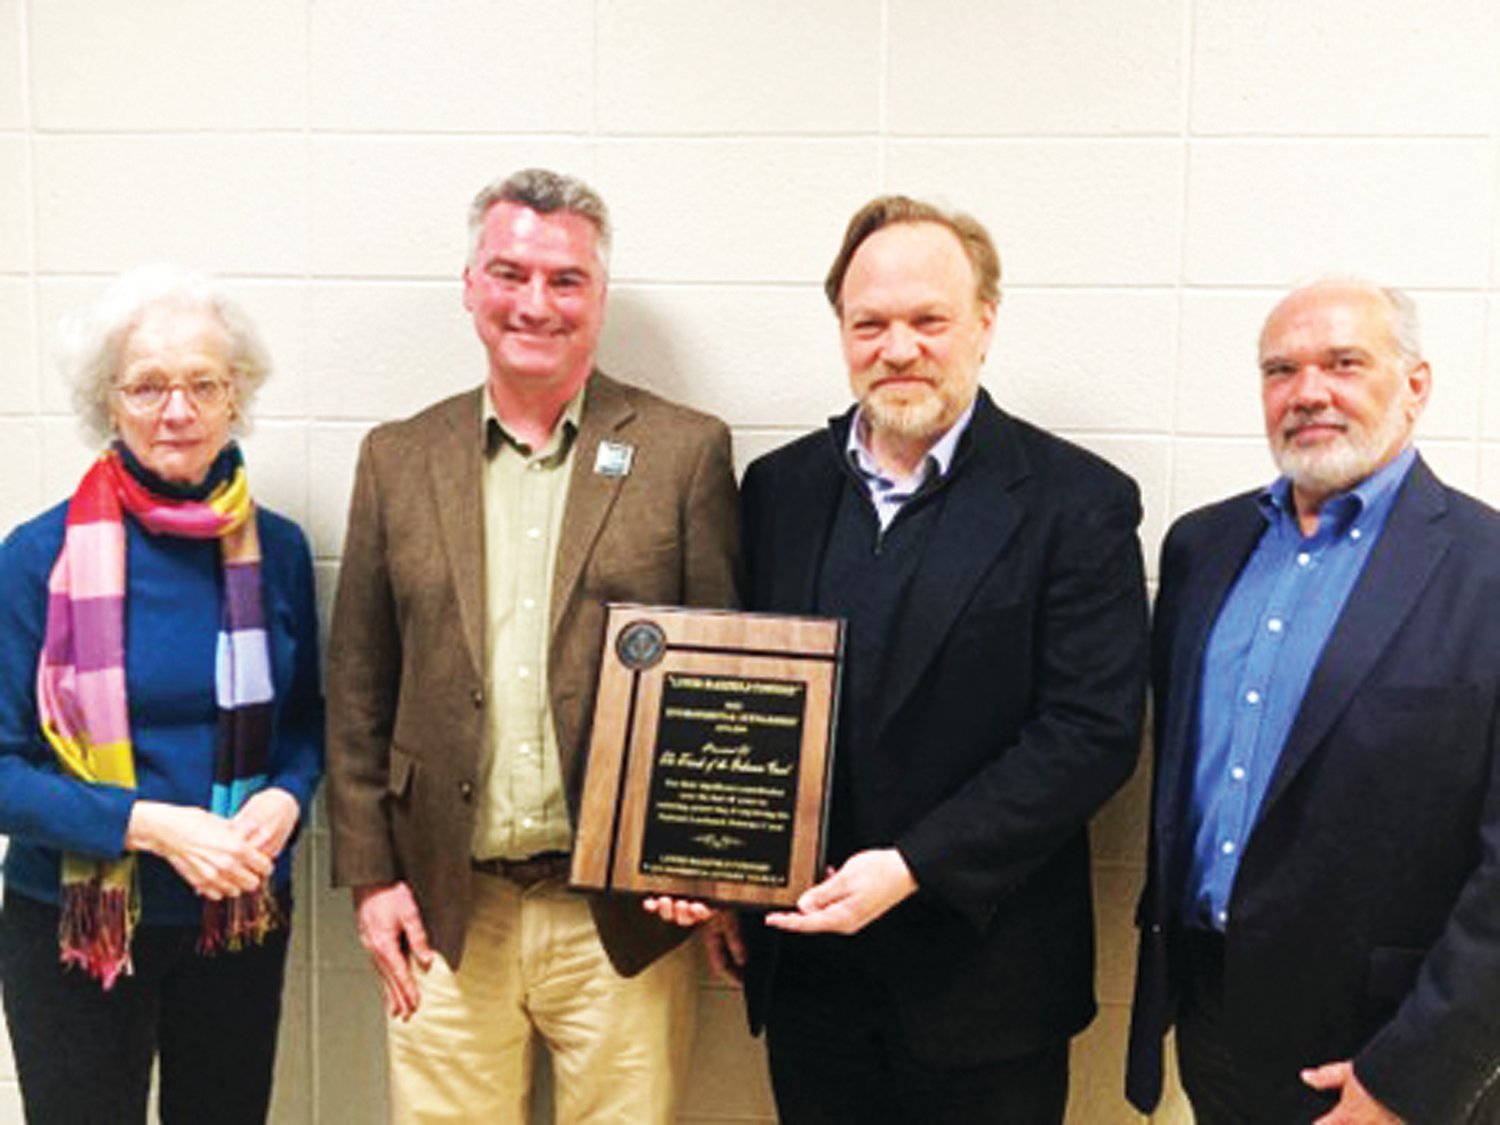 CHRIS ENGLISH
From left, Susan Taylor, Michael Ginder, Brett Webber and Jack Torres of the Friends of the Delaware Canal receive the Environmental Stewardship Award presented to them by the Lower Makefield Township Environmental Advisory Council.